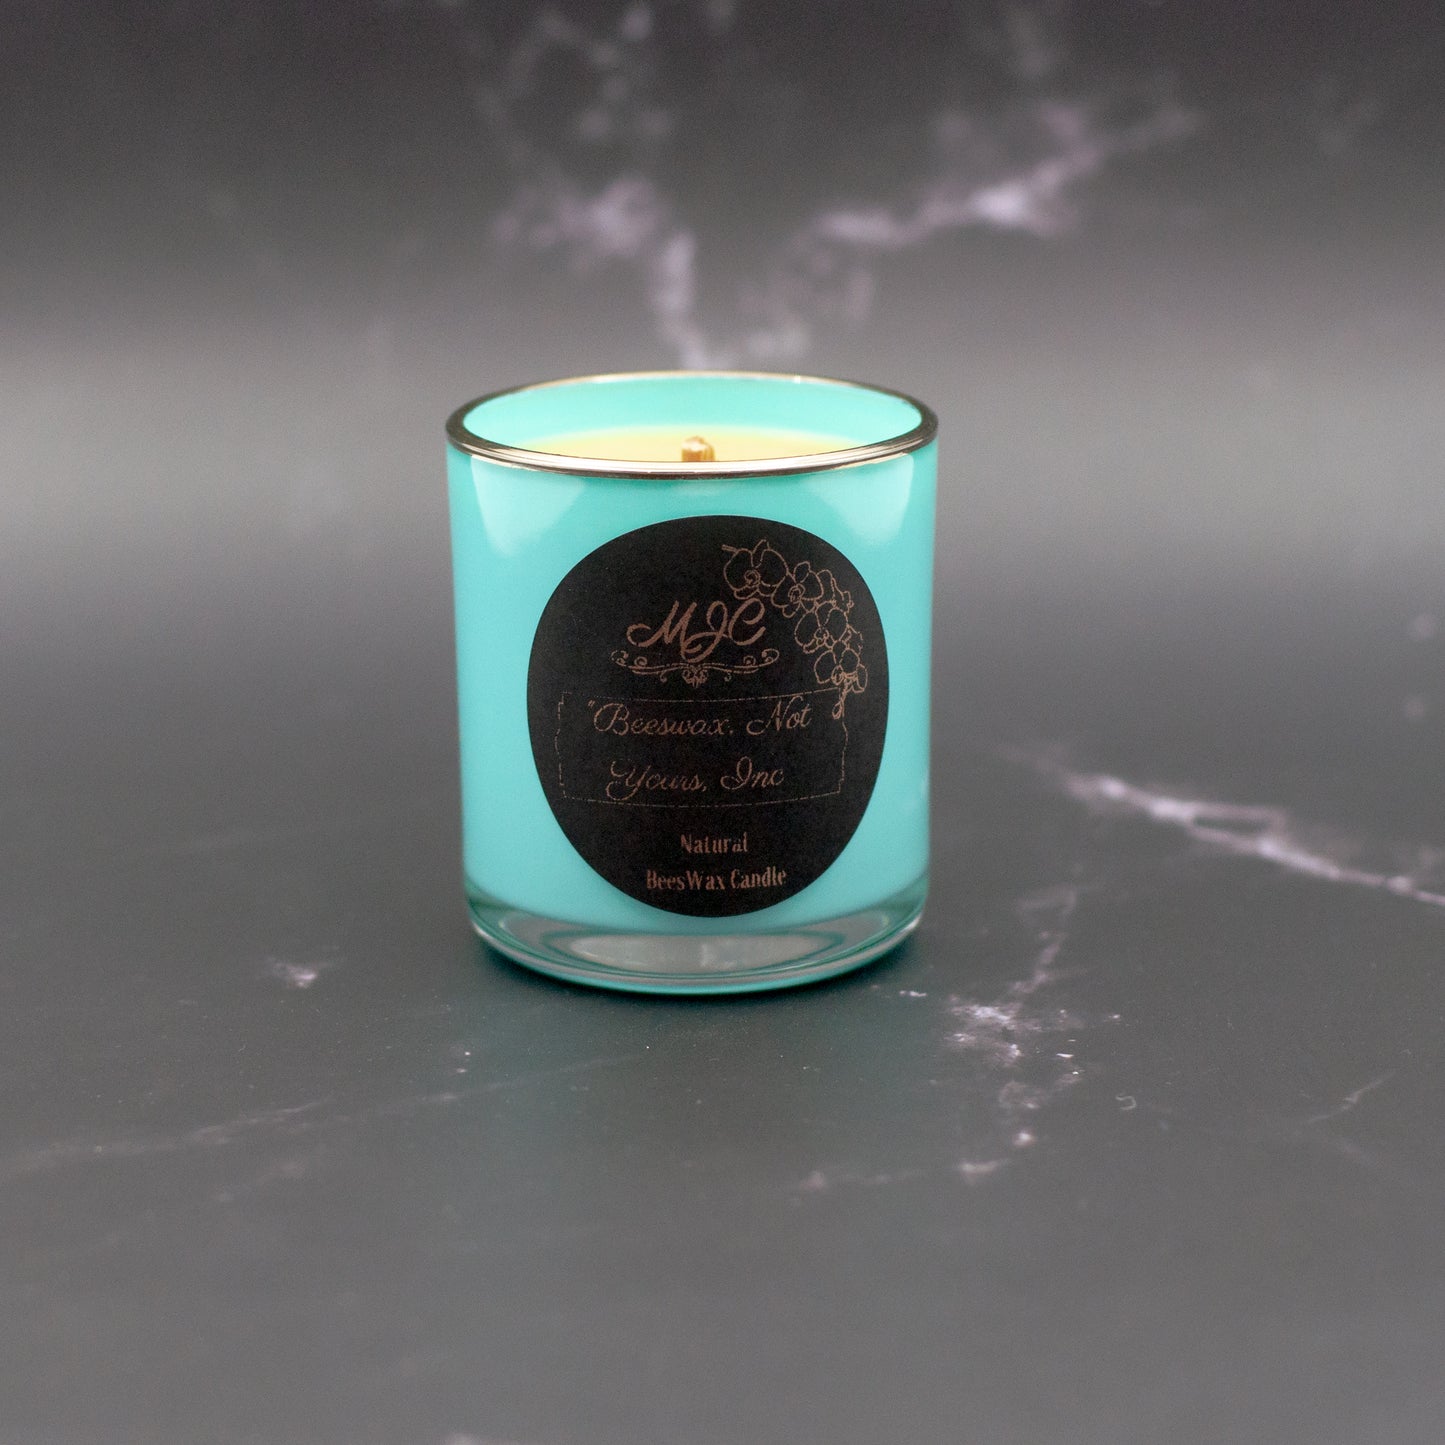 Small Pure Unscented Beeswax Candle in Teal Glass Jar 220g/7.7oz